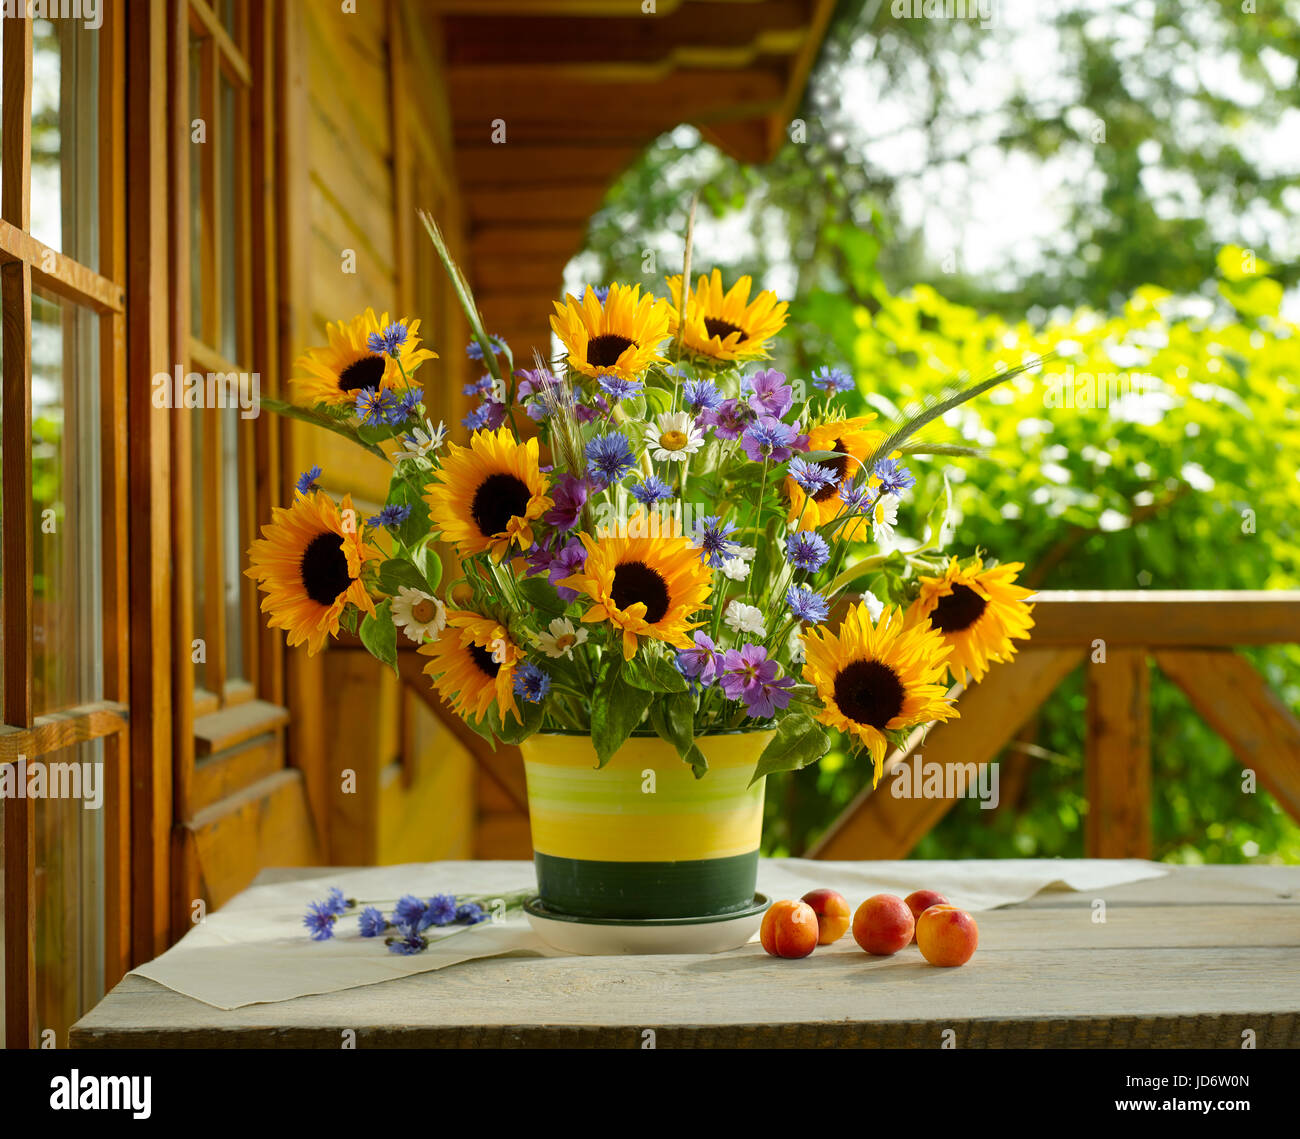 Bouquet of flowers with sunflowers. Stock Photo